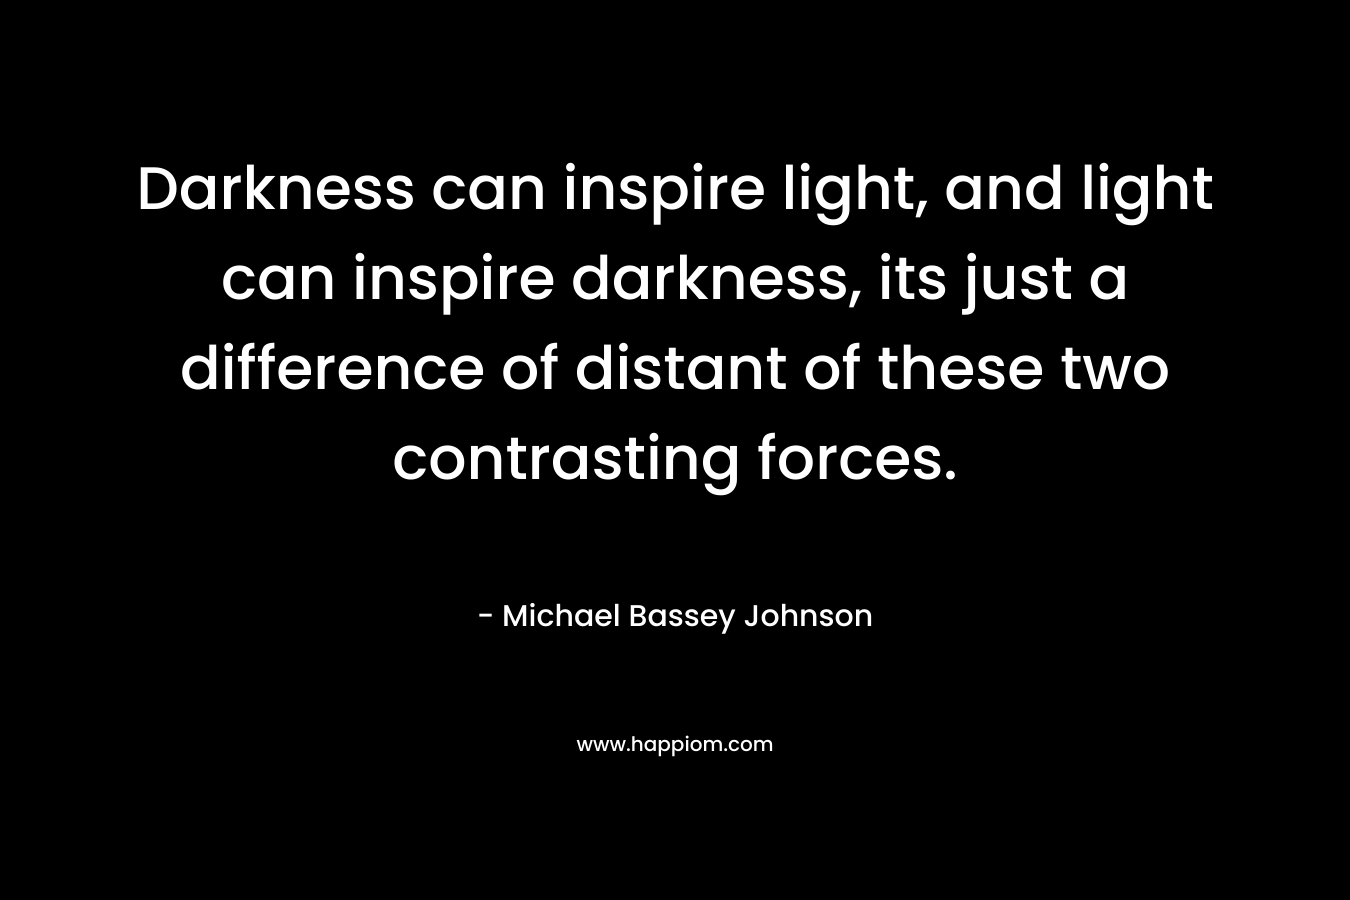 Darkness can inspire light, and light can inspire darkness, its just a difference of distant of these two contrasting forces.